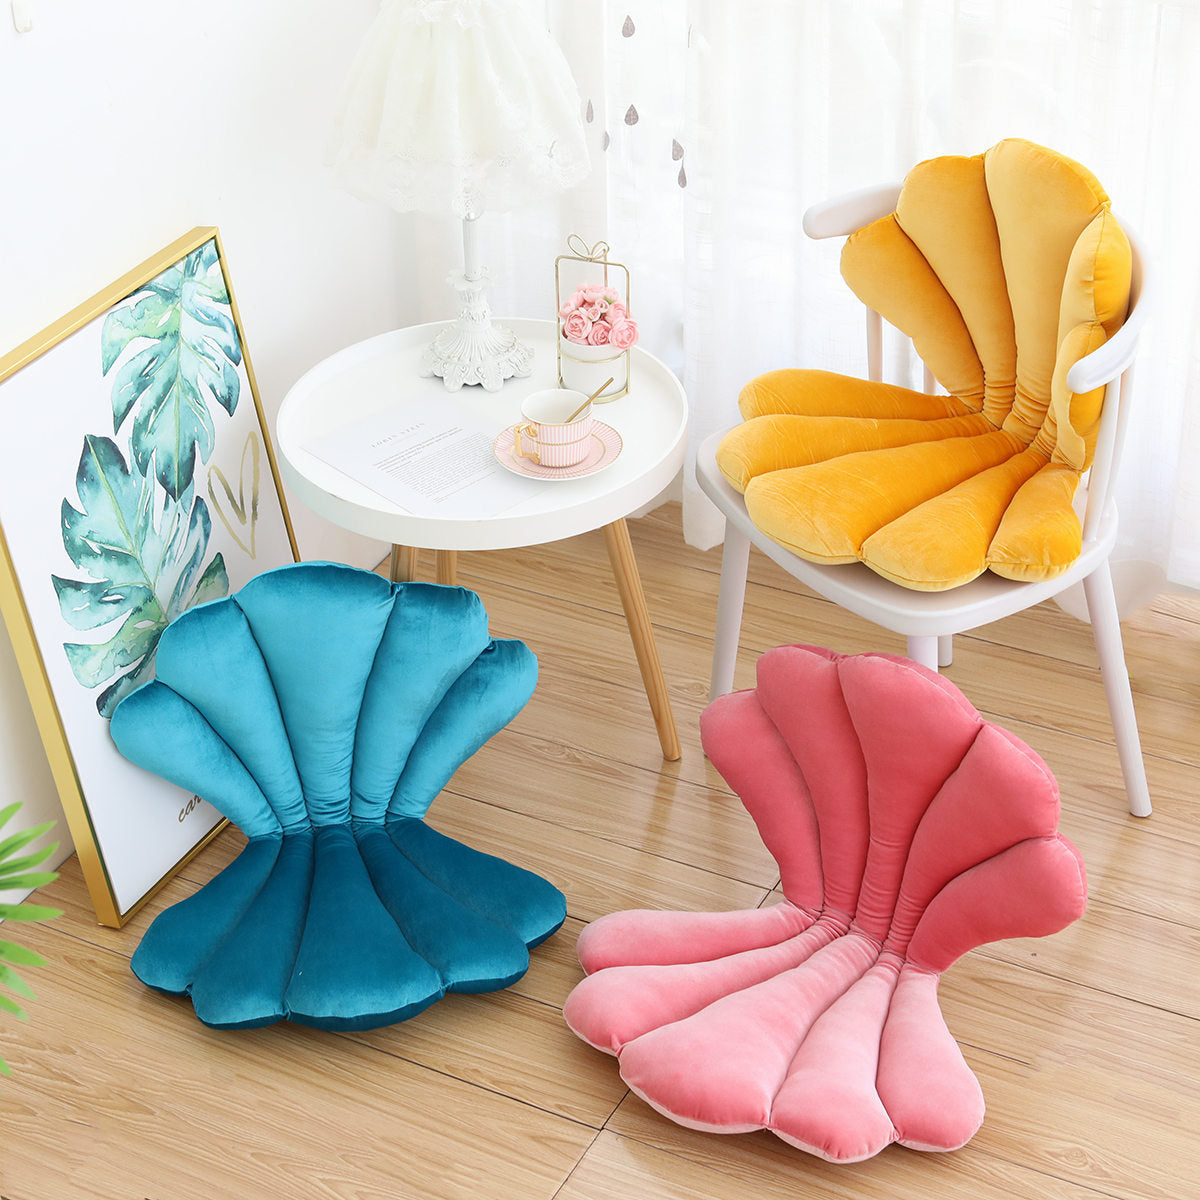 Luxurious Velvet Seal Shell Chair Cushion Unqiue Rose Seat Pillow Upscale Restaurant Chair Decor Girly Room Decorations